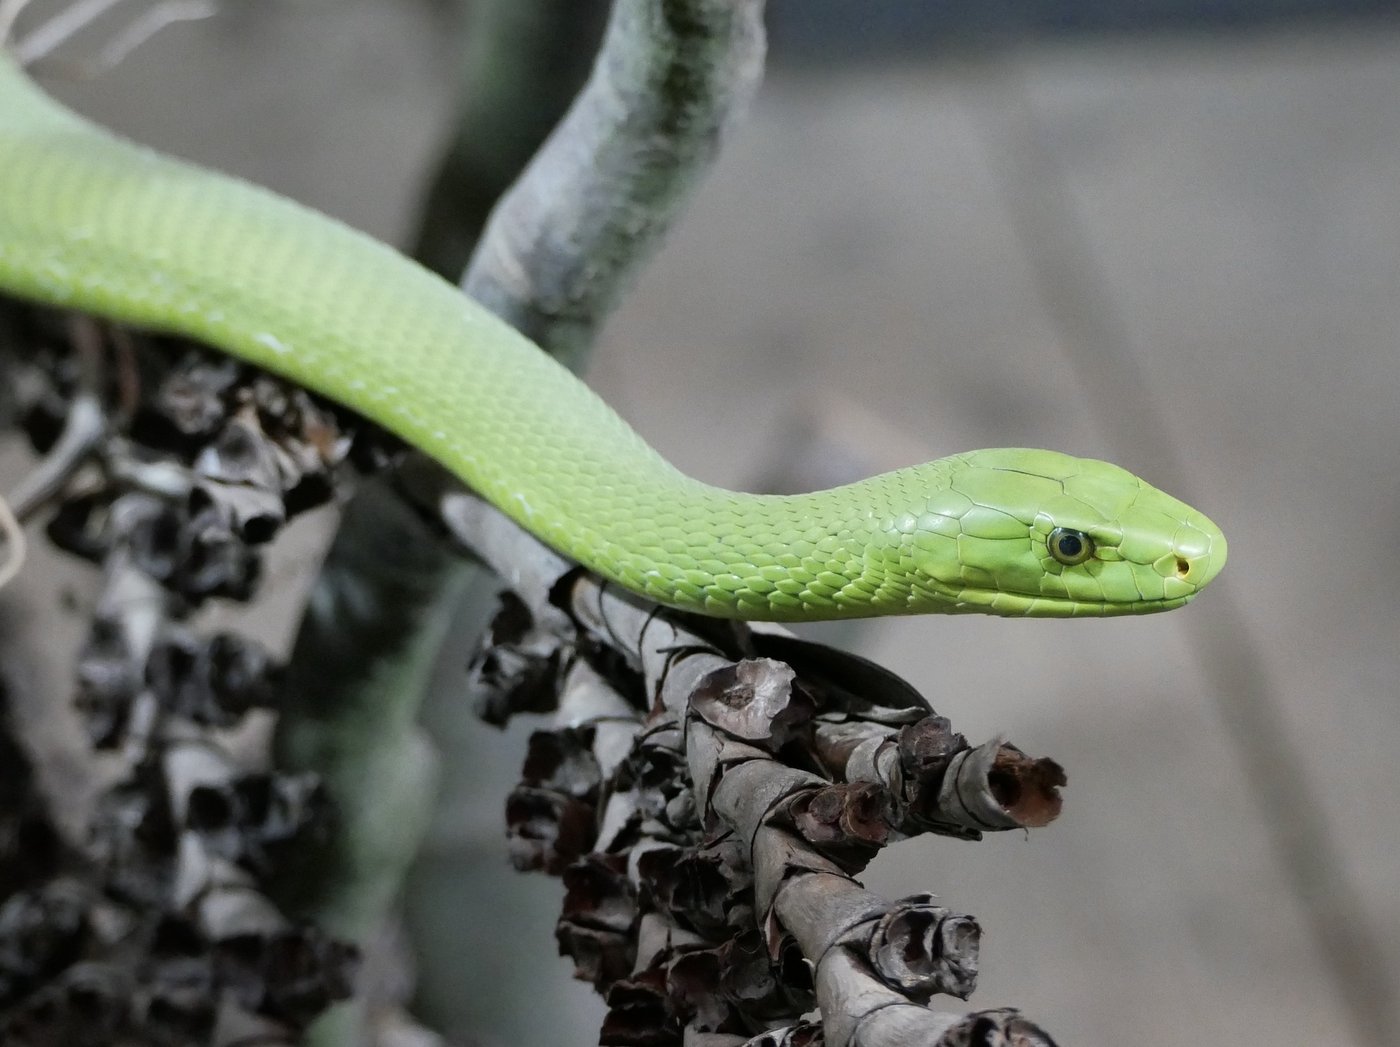 The picture shows a Green Mamba (Dendroaspis angusticeps) from the side sitting on a branch.